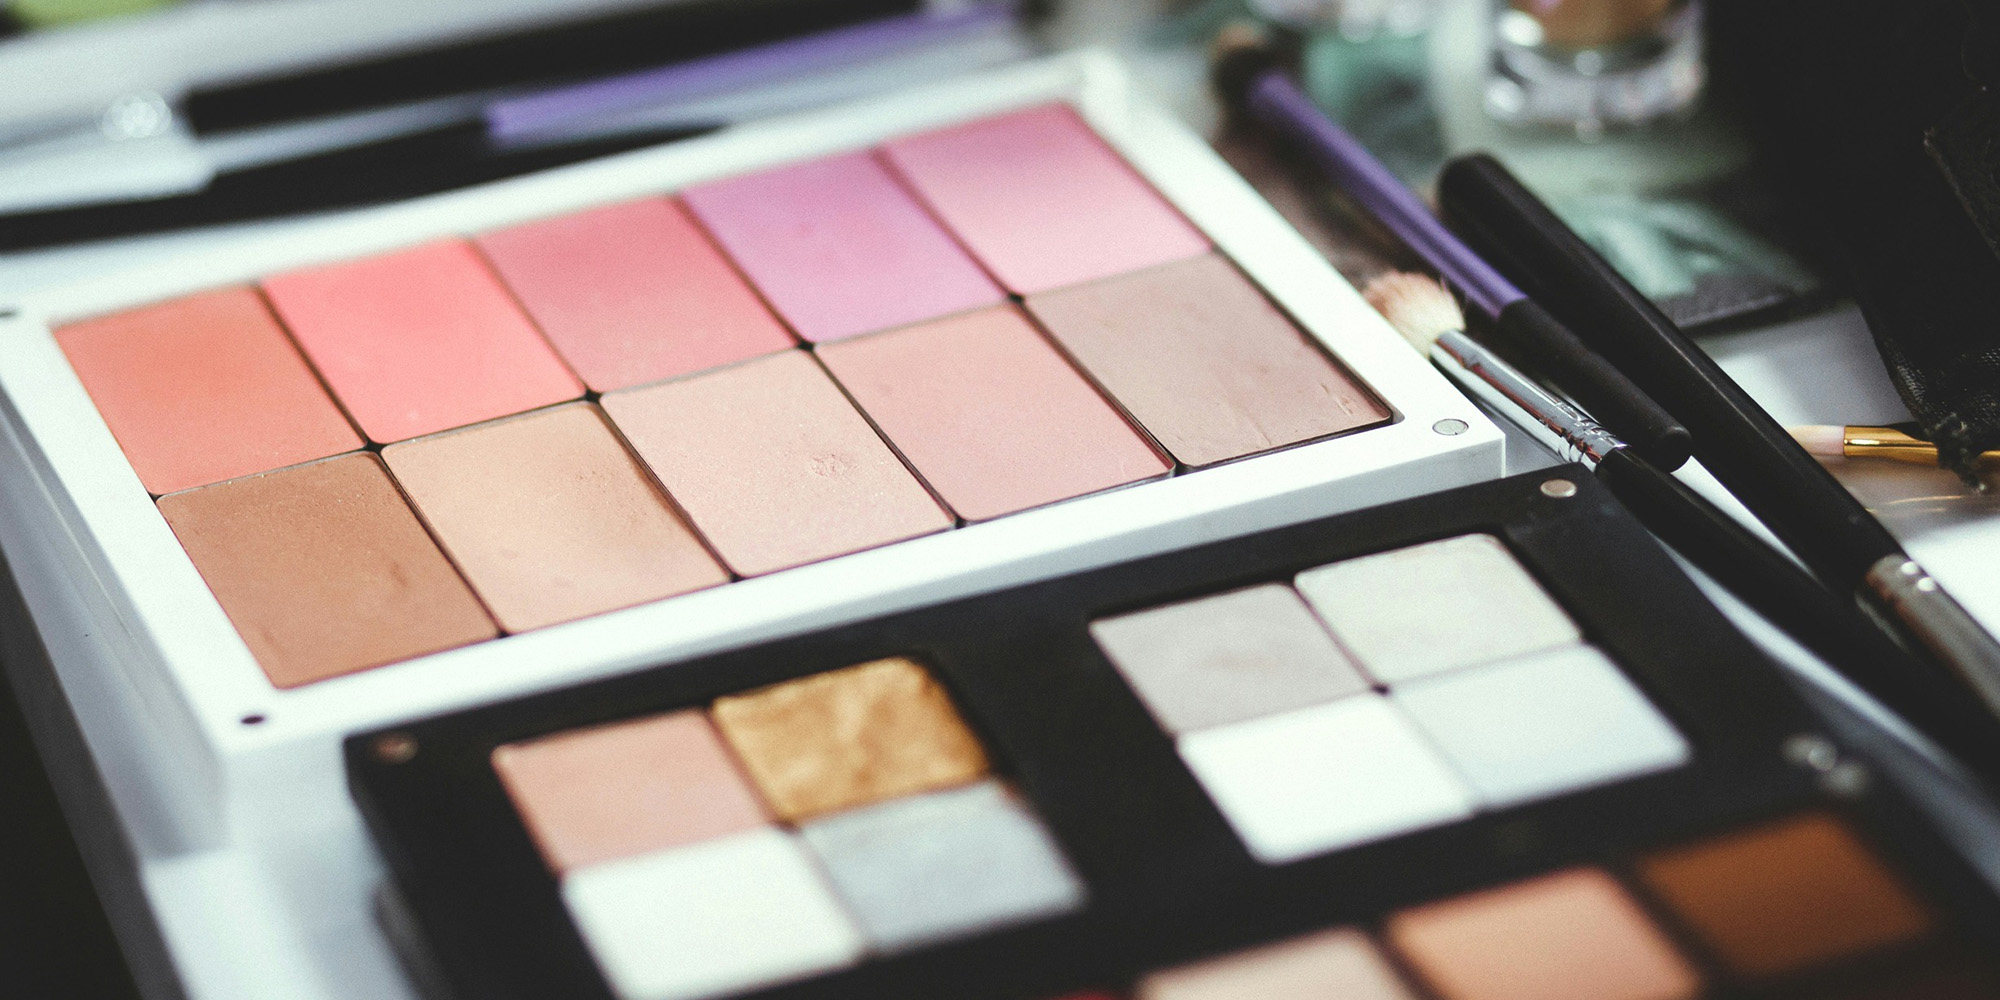 McKinsey & Co.: Consumers Expected To Pull Back On Skincare And Makeup Purchases This Year